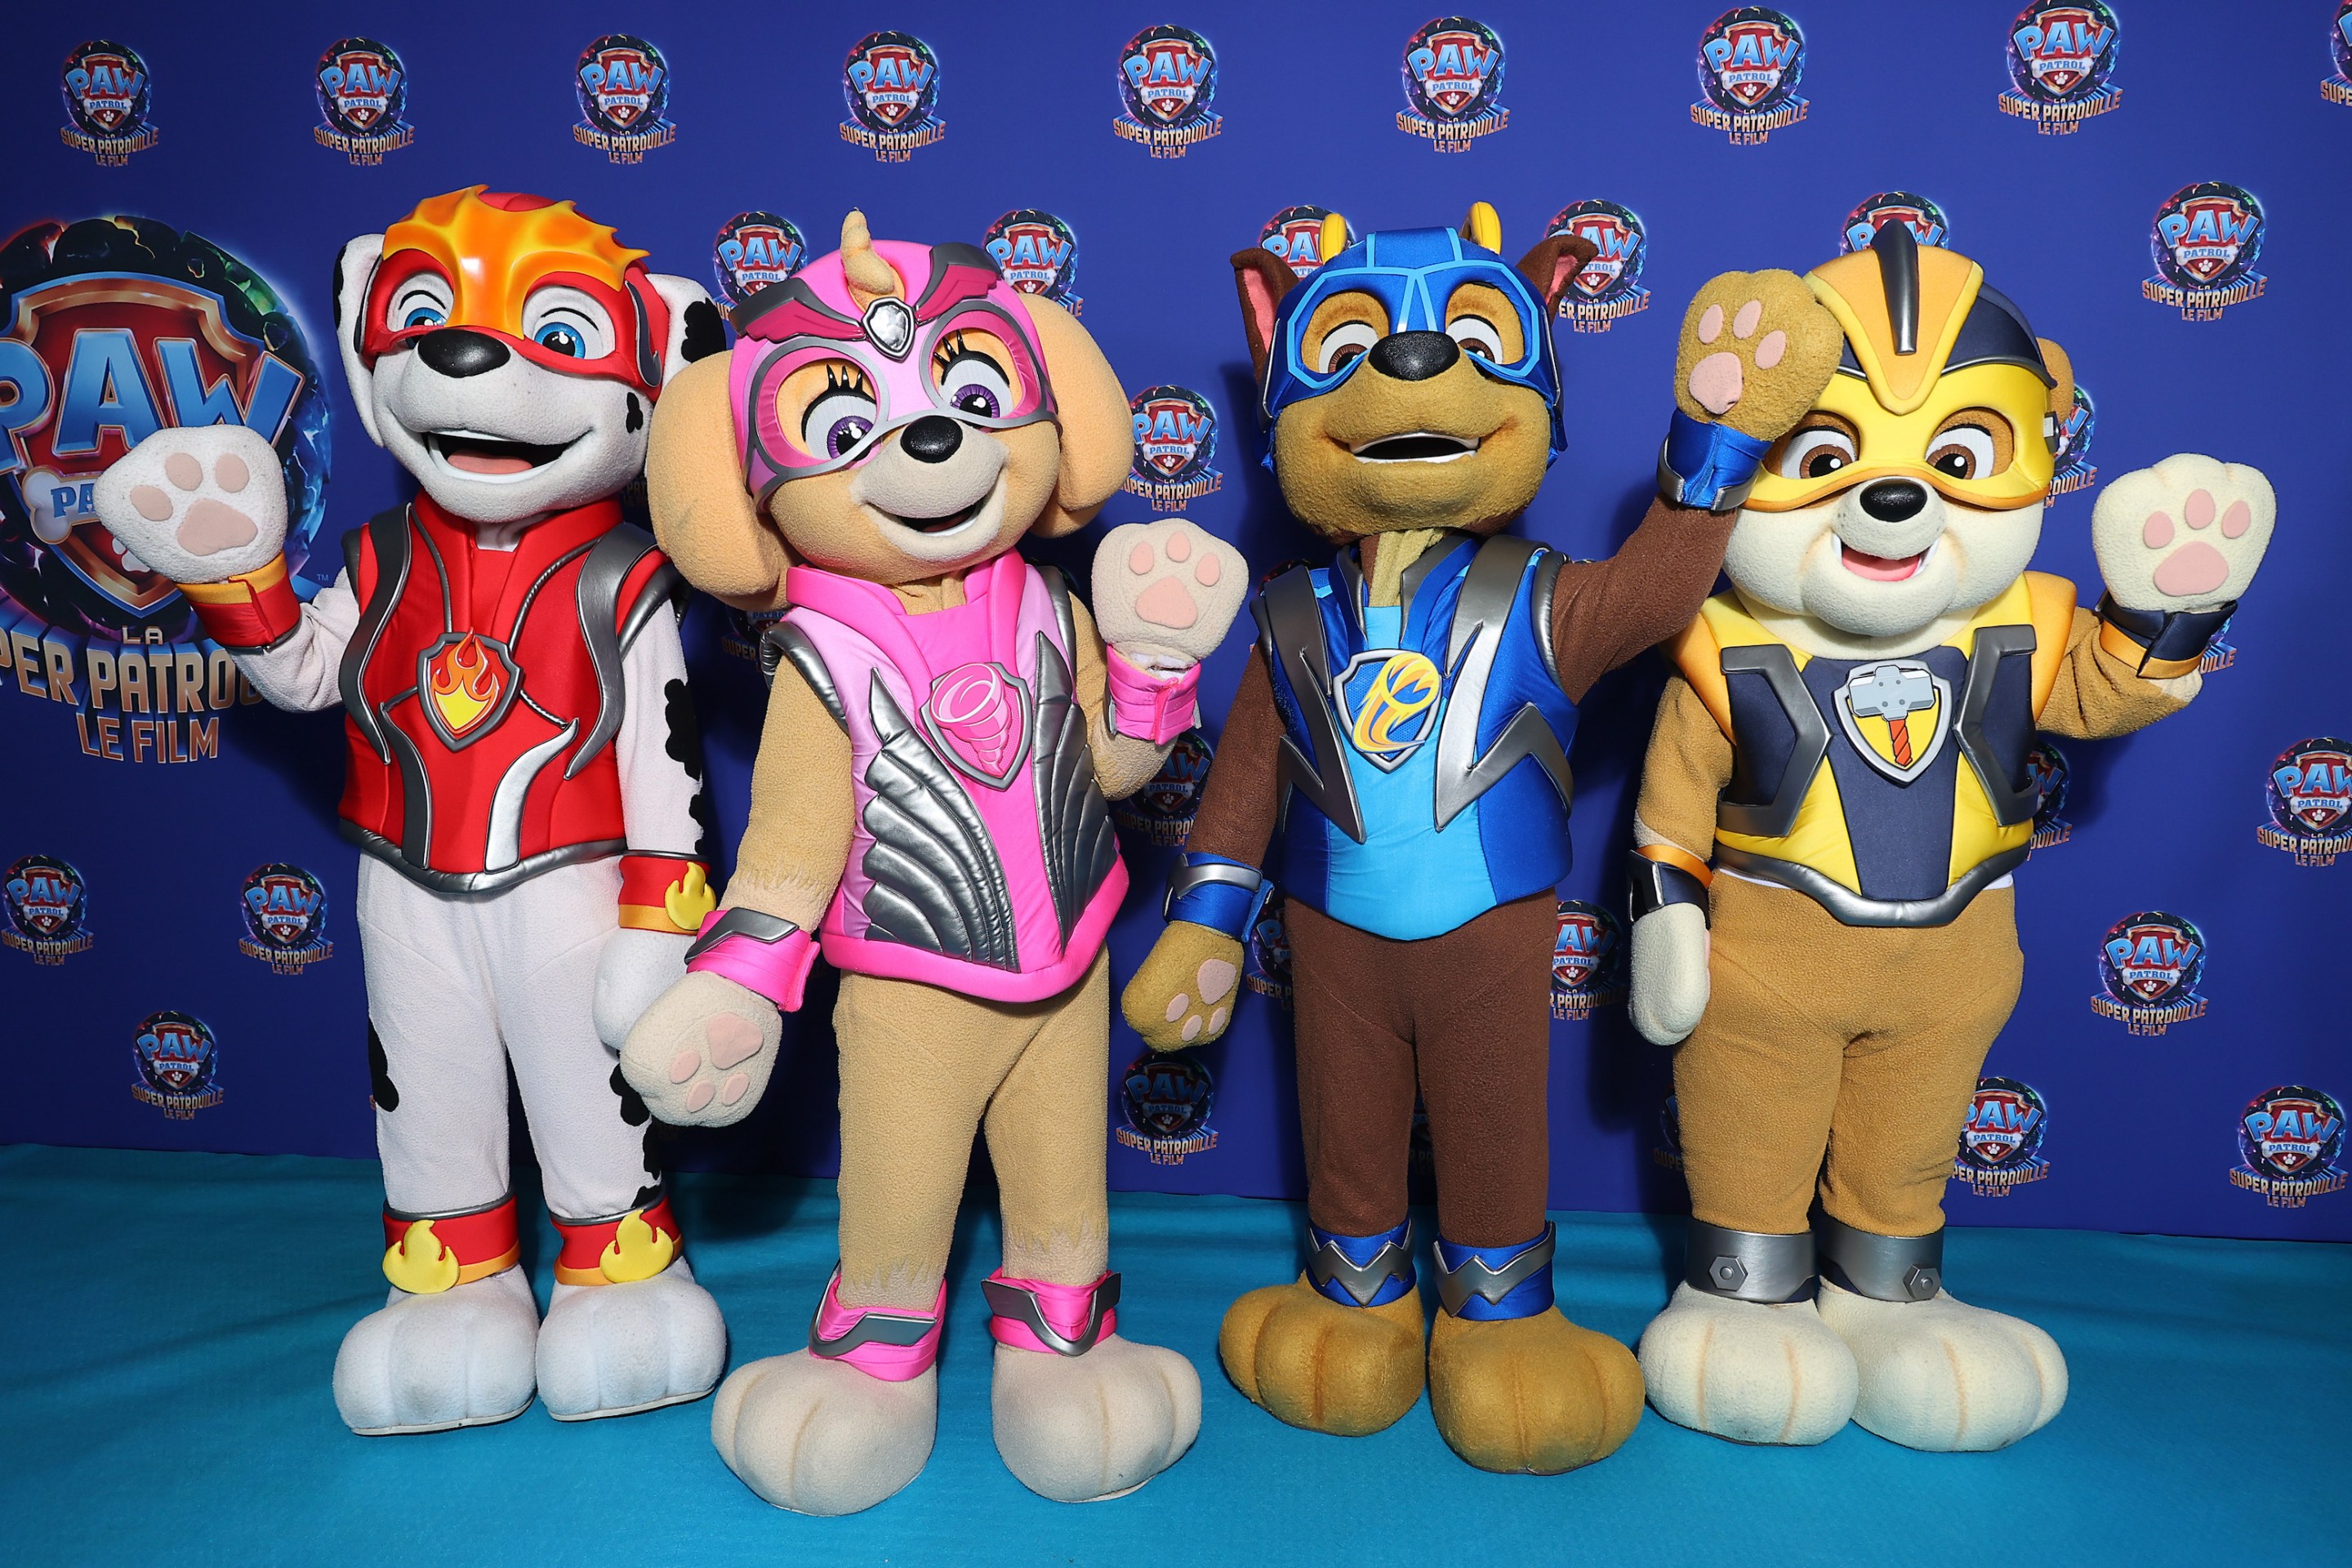 The animals from Paw Patrol, or more accurately people wearing costumes of the animals from Paw Patrol, waving at the Paris premiere of the Paw Patrol movie.